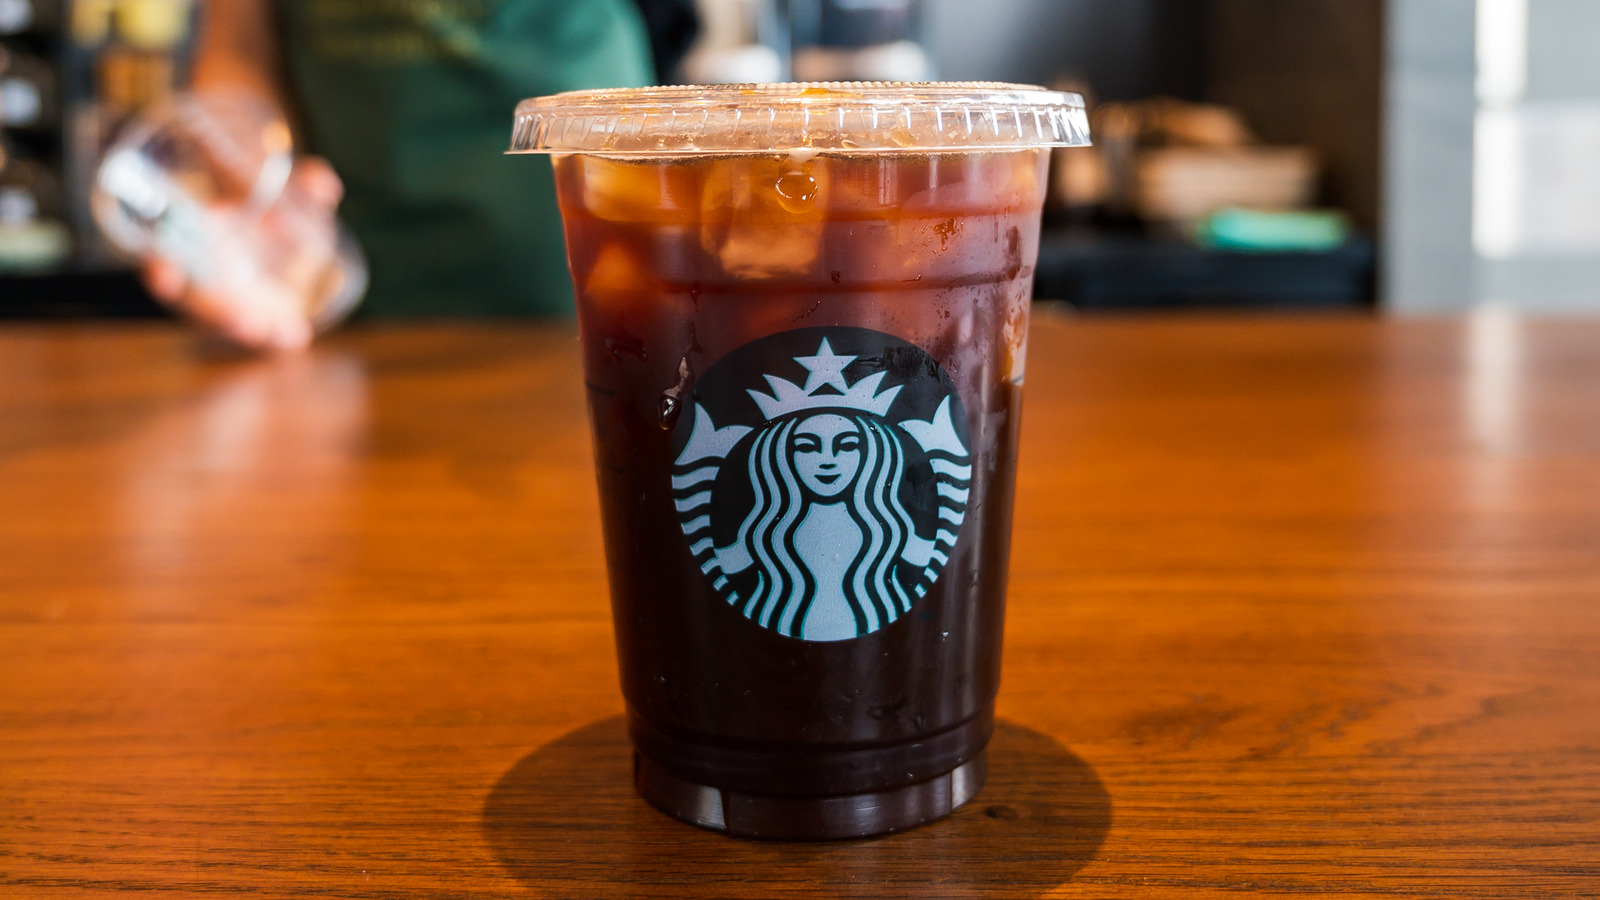 Starbucks 'Hack' to Get Three Drinks for the Price of One Goes Viral